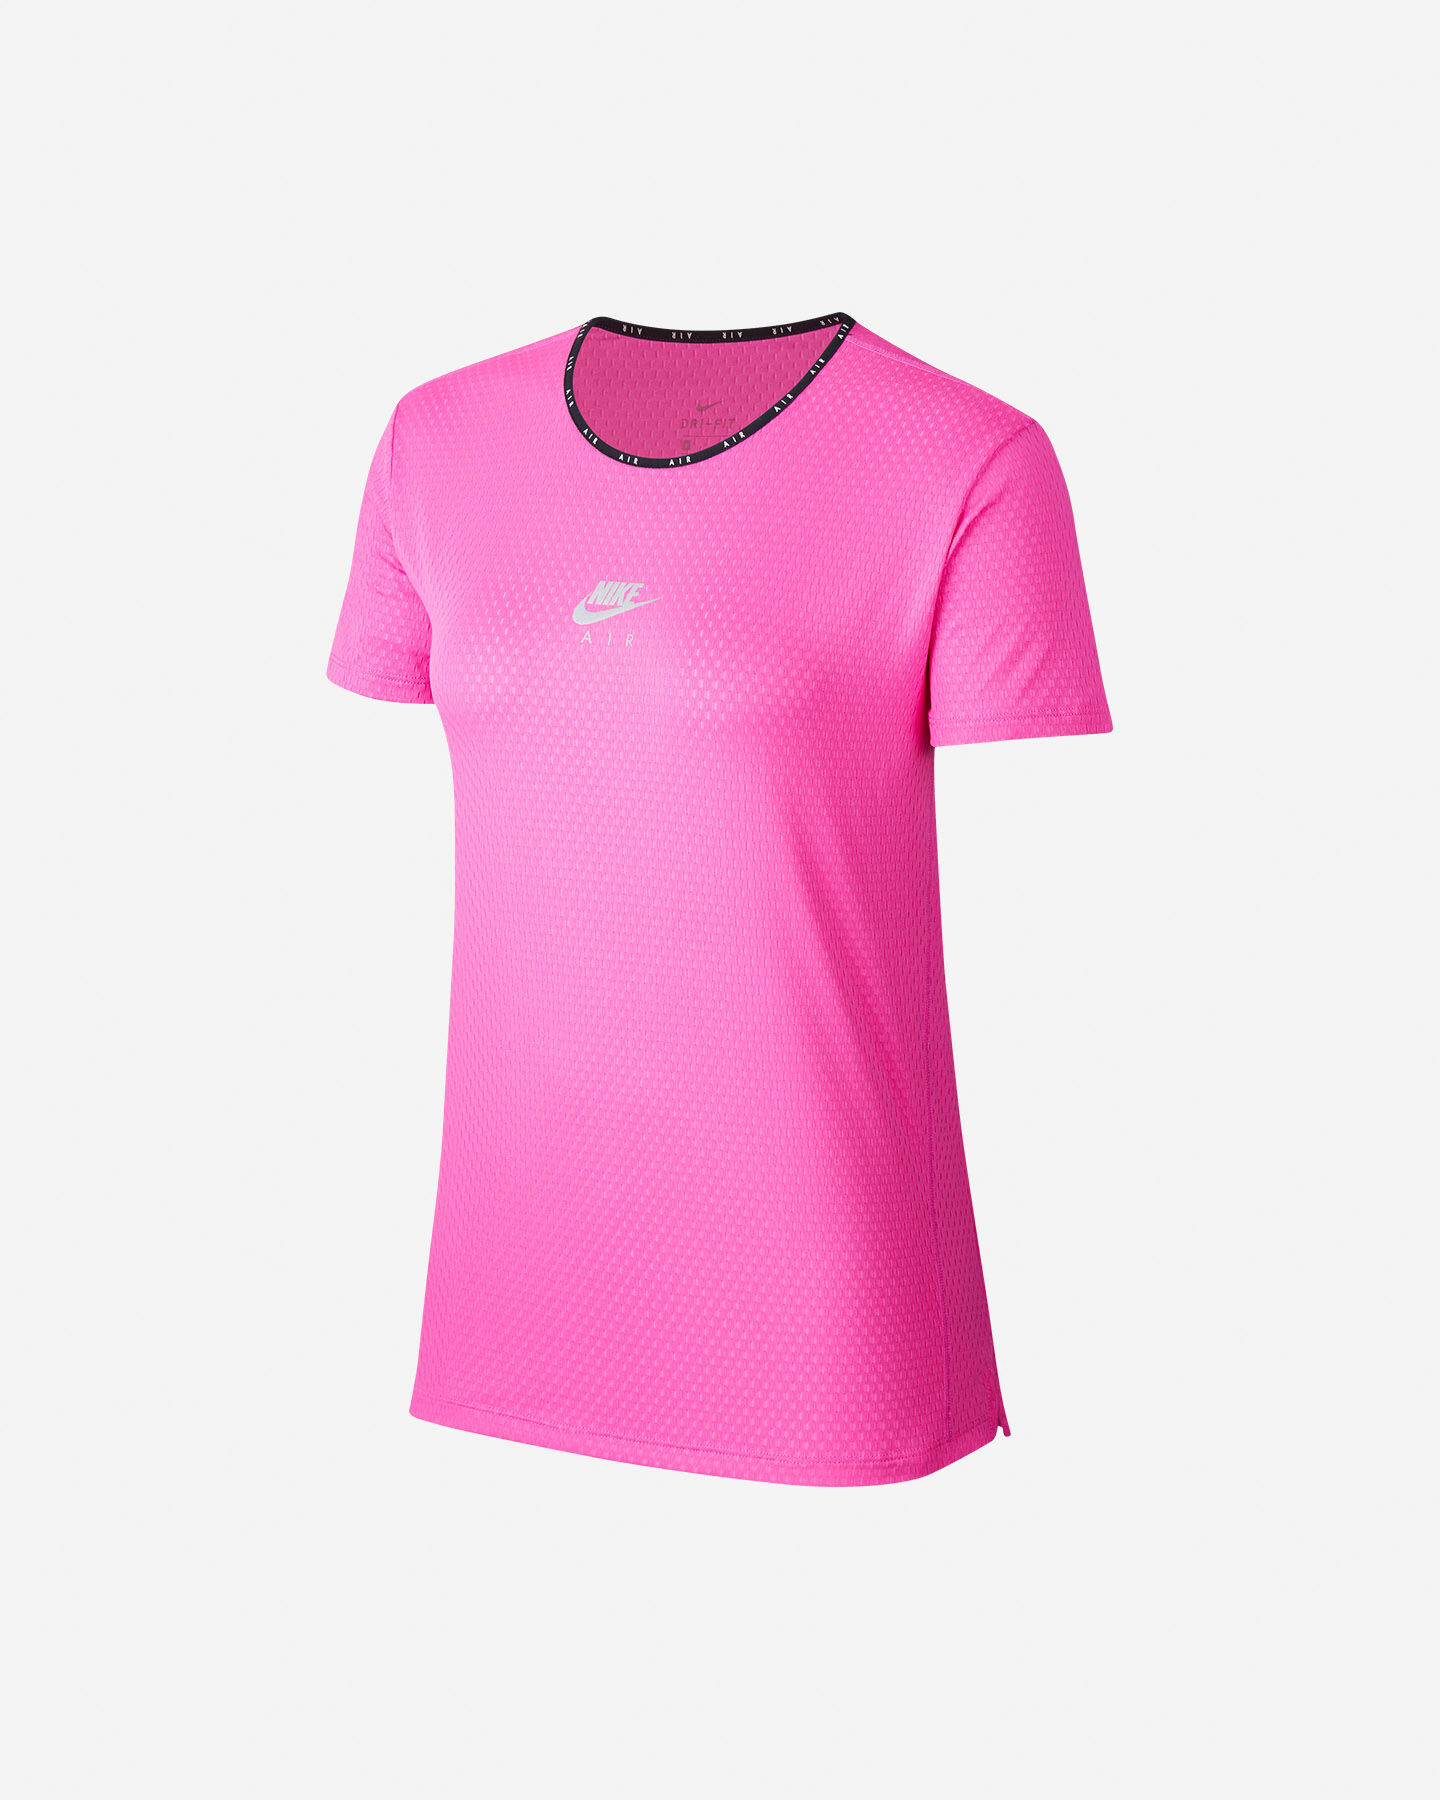  T-Shirt running NIKE AIR TOP W S5164941|601|XS scatto 0